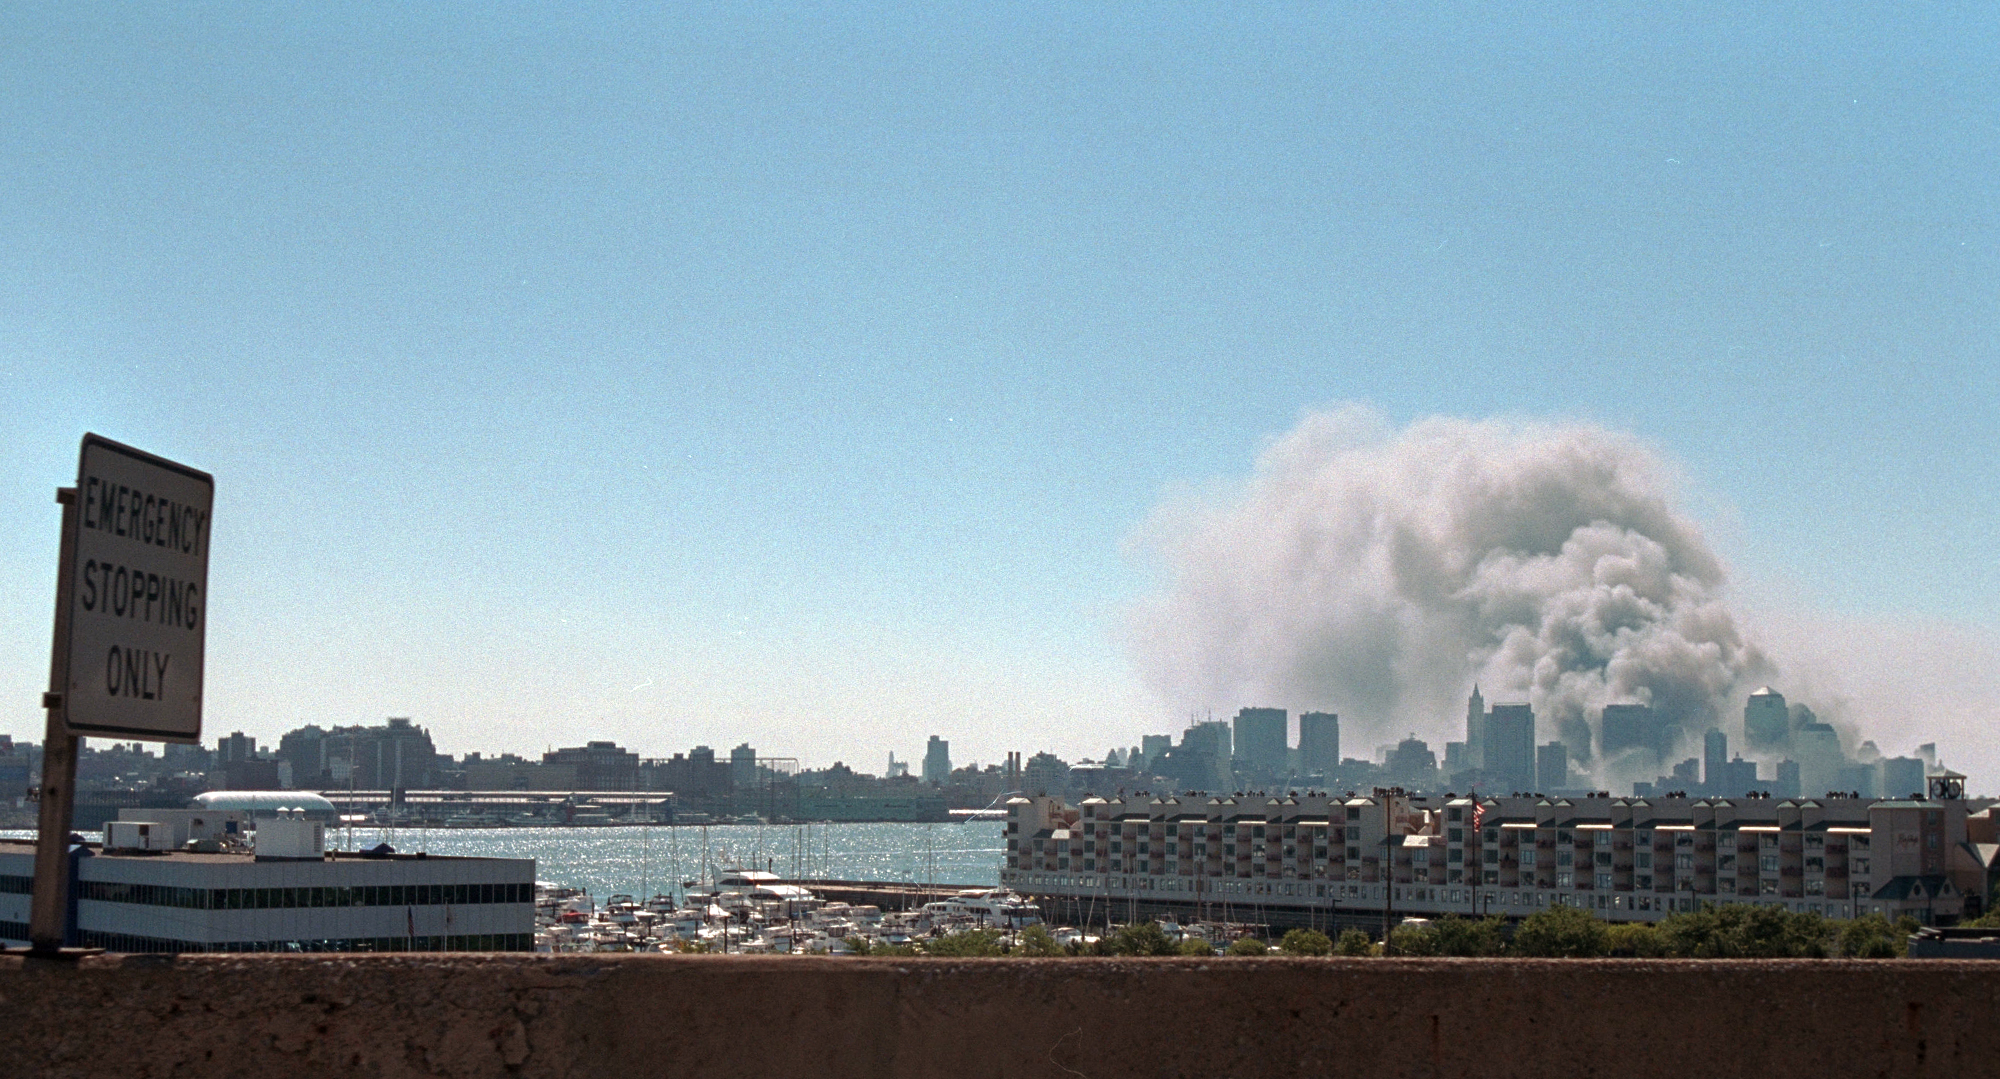 Smoke rises from the site of the World Trade Center, September 11, 2001. (P7127-23)